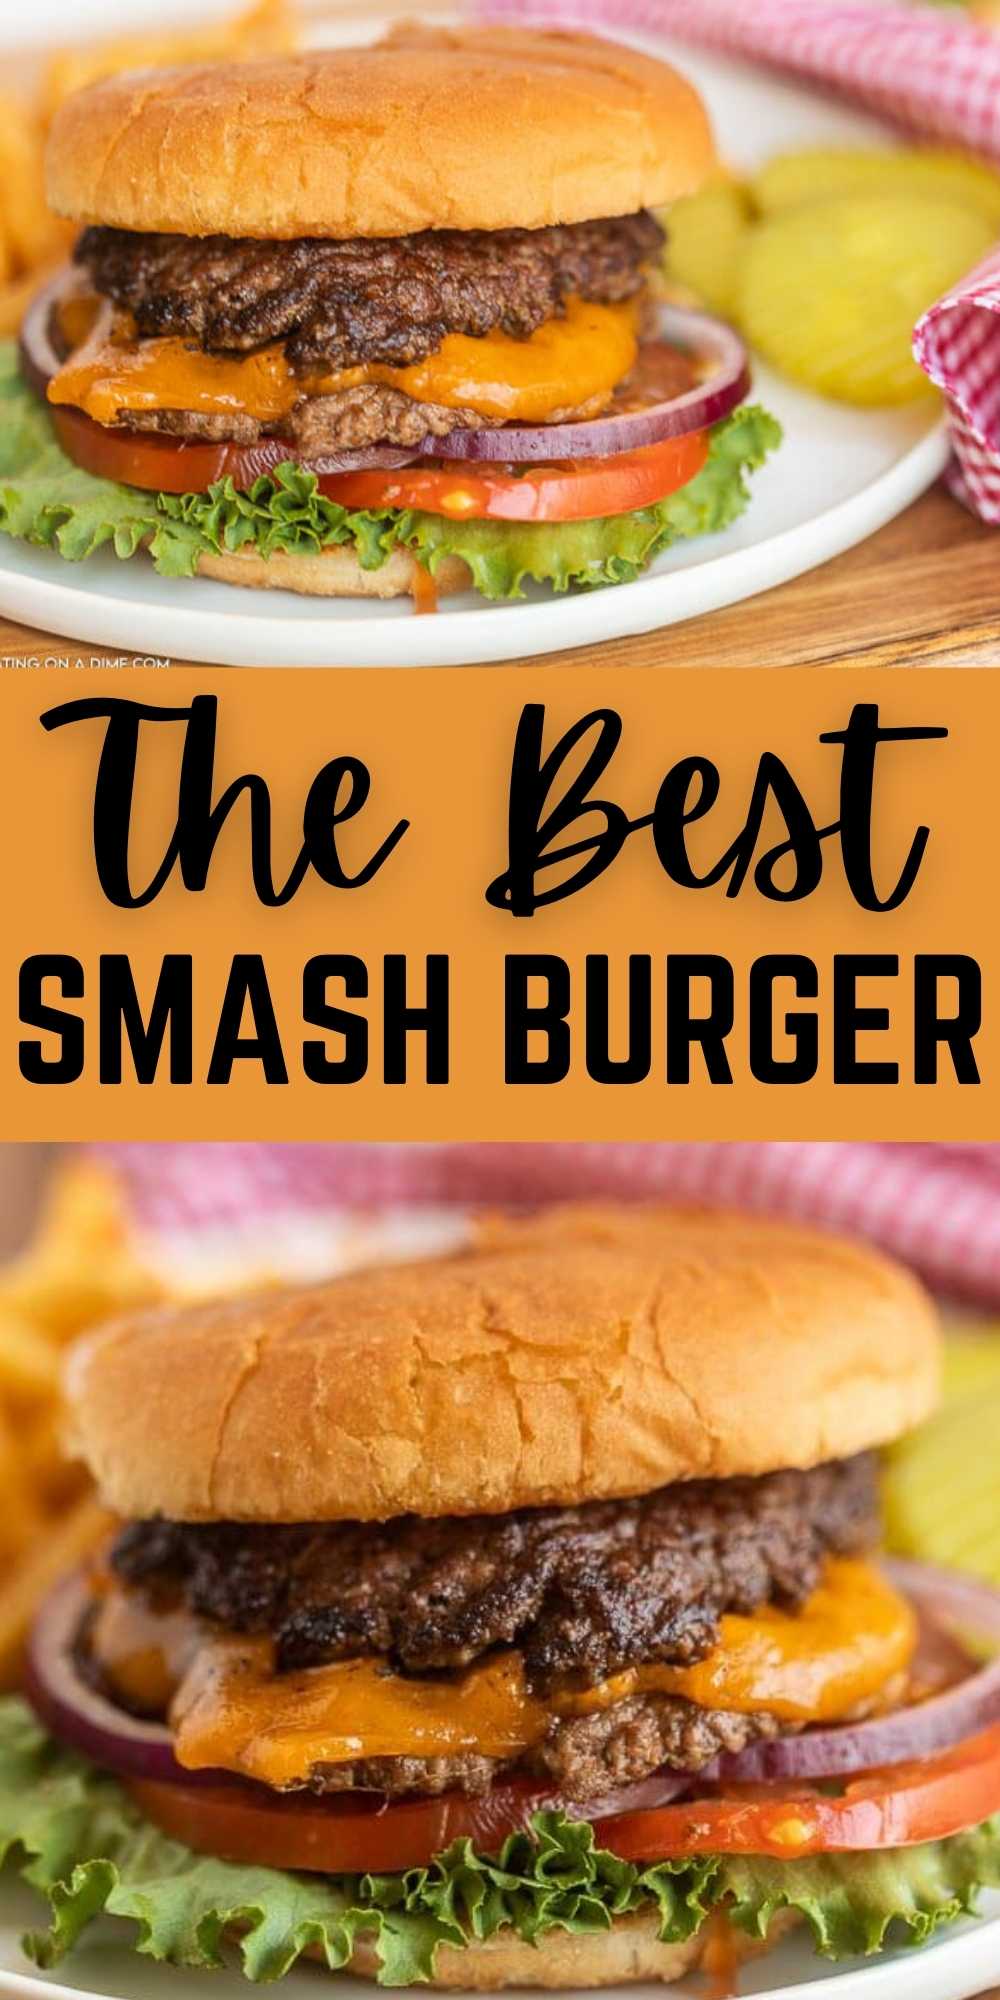 Anyone can easily make this Smash Burger Recipe with fabulous results. The thin patties are browned to perfection and juicy on the inside. Learn how to make a delicious smash burger on a griddle with this simple recipe! #eatingonadime #burgerrecipes #smashburgers #griddlerecipes 
